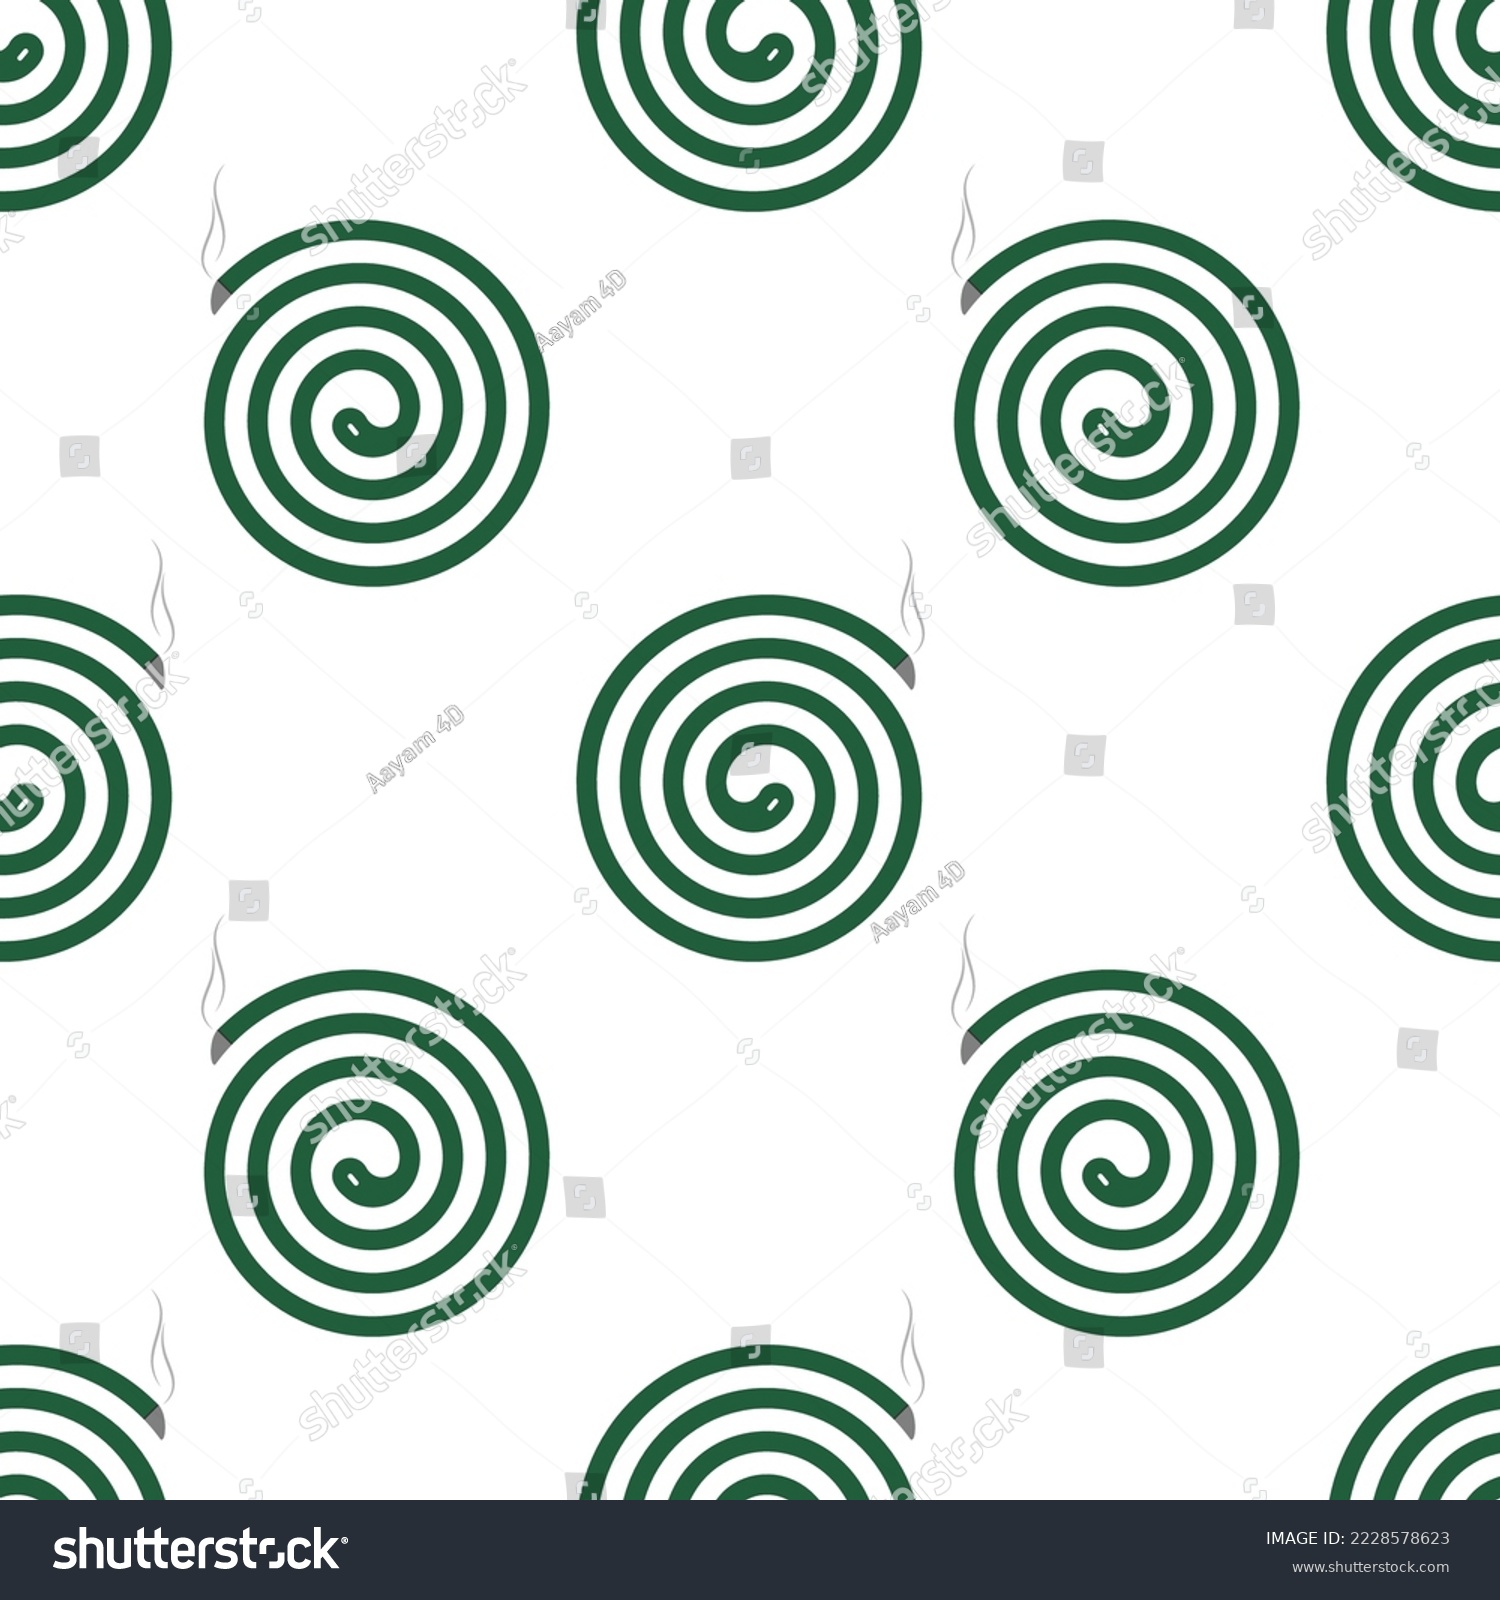 SVG of Mosquito Repellent Coil Icon Seamless Pattern, Bug, Insect Killer Smoldering Spiral Incense Vector Art Illustration svg